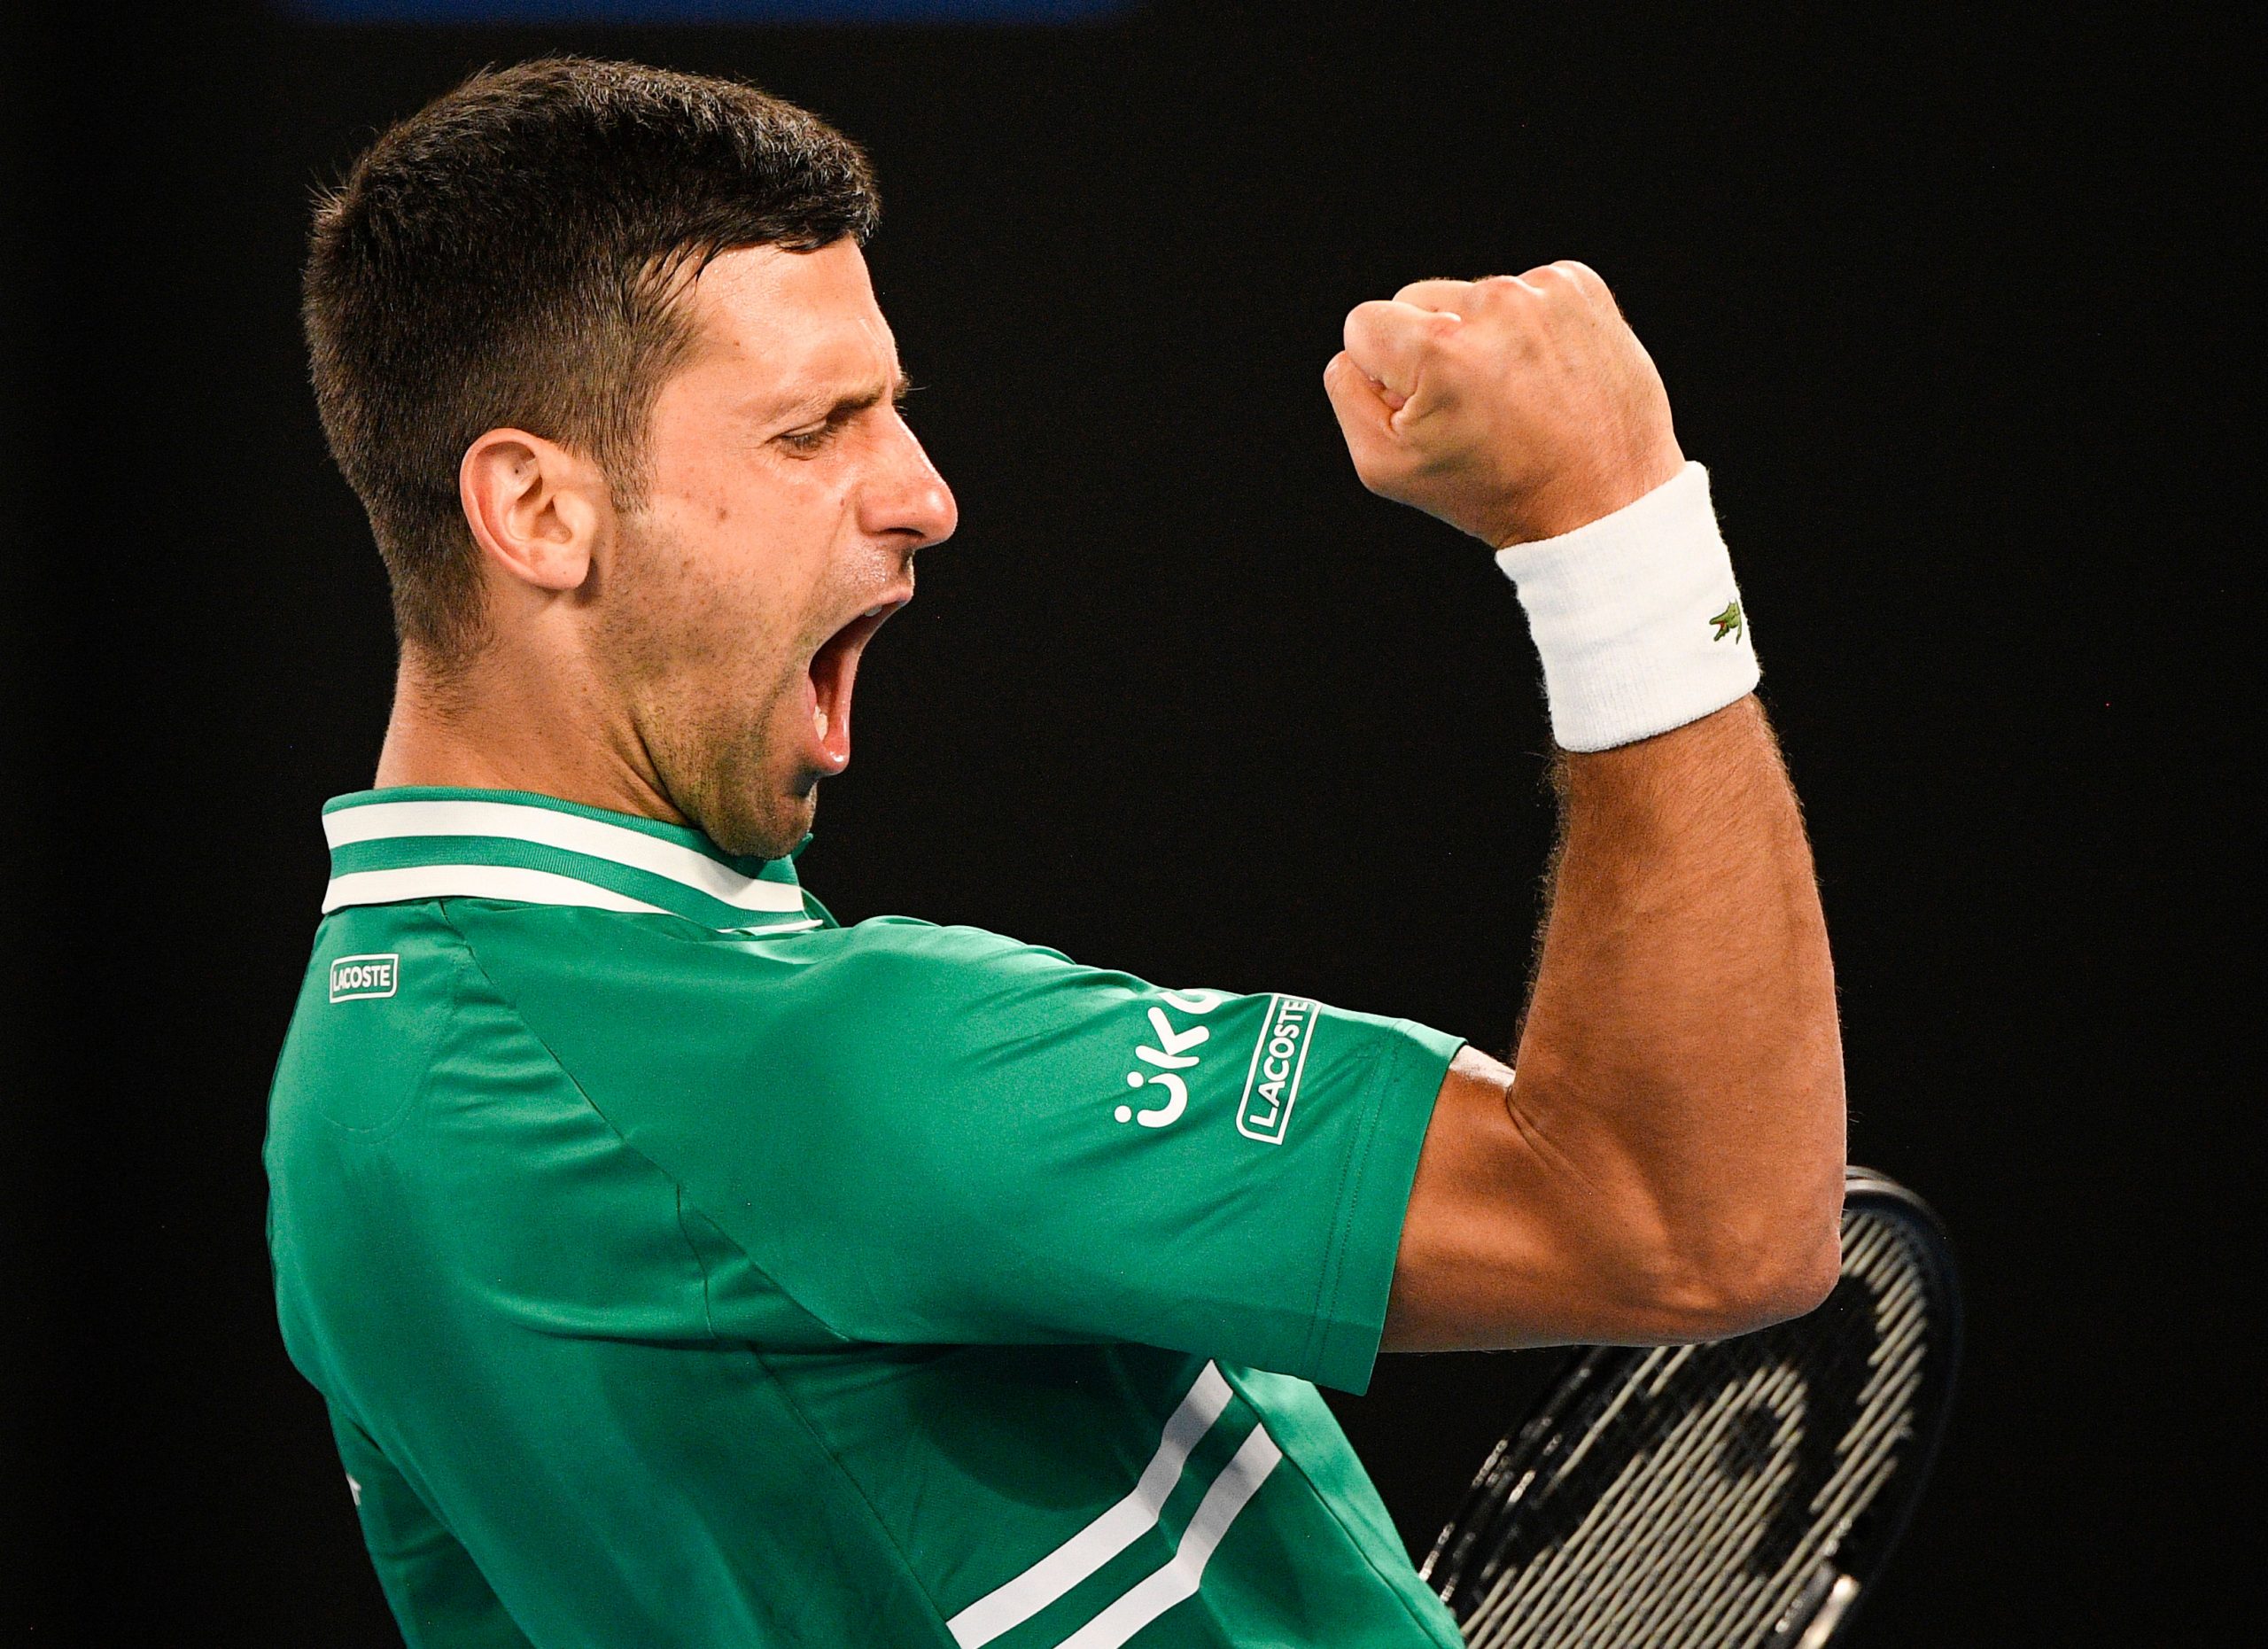 Novak Djokovic battles to victory as he warms up for French Open